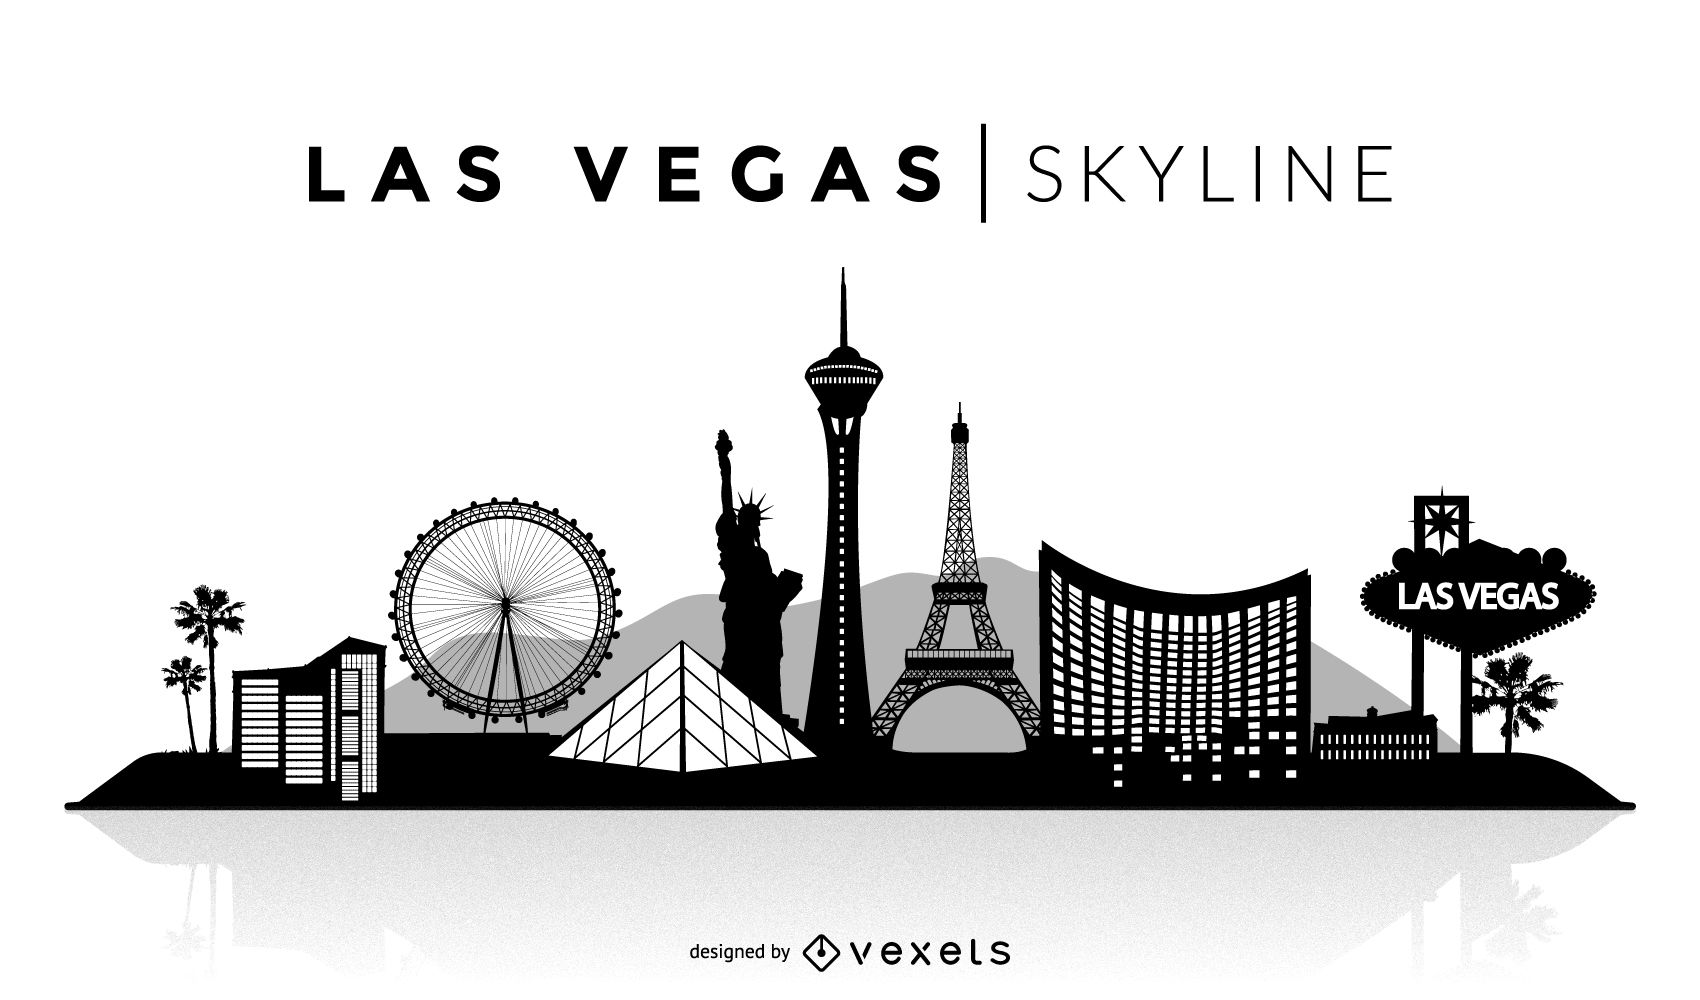 Las Vegas Skyline Vector Free at Collection of Las